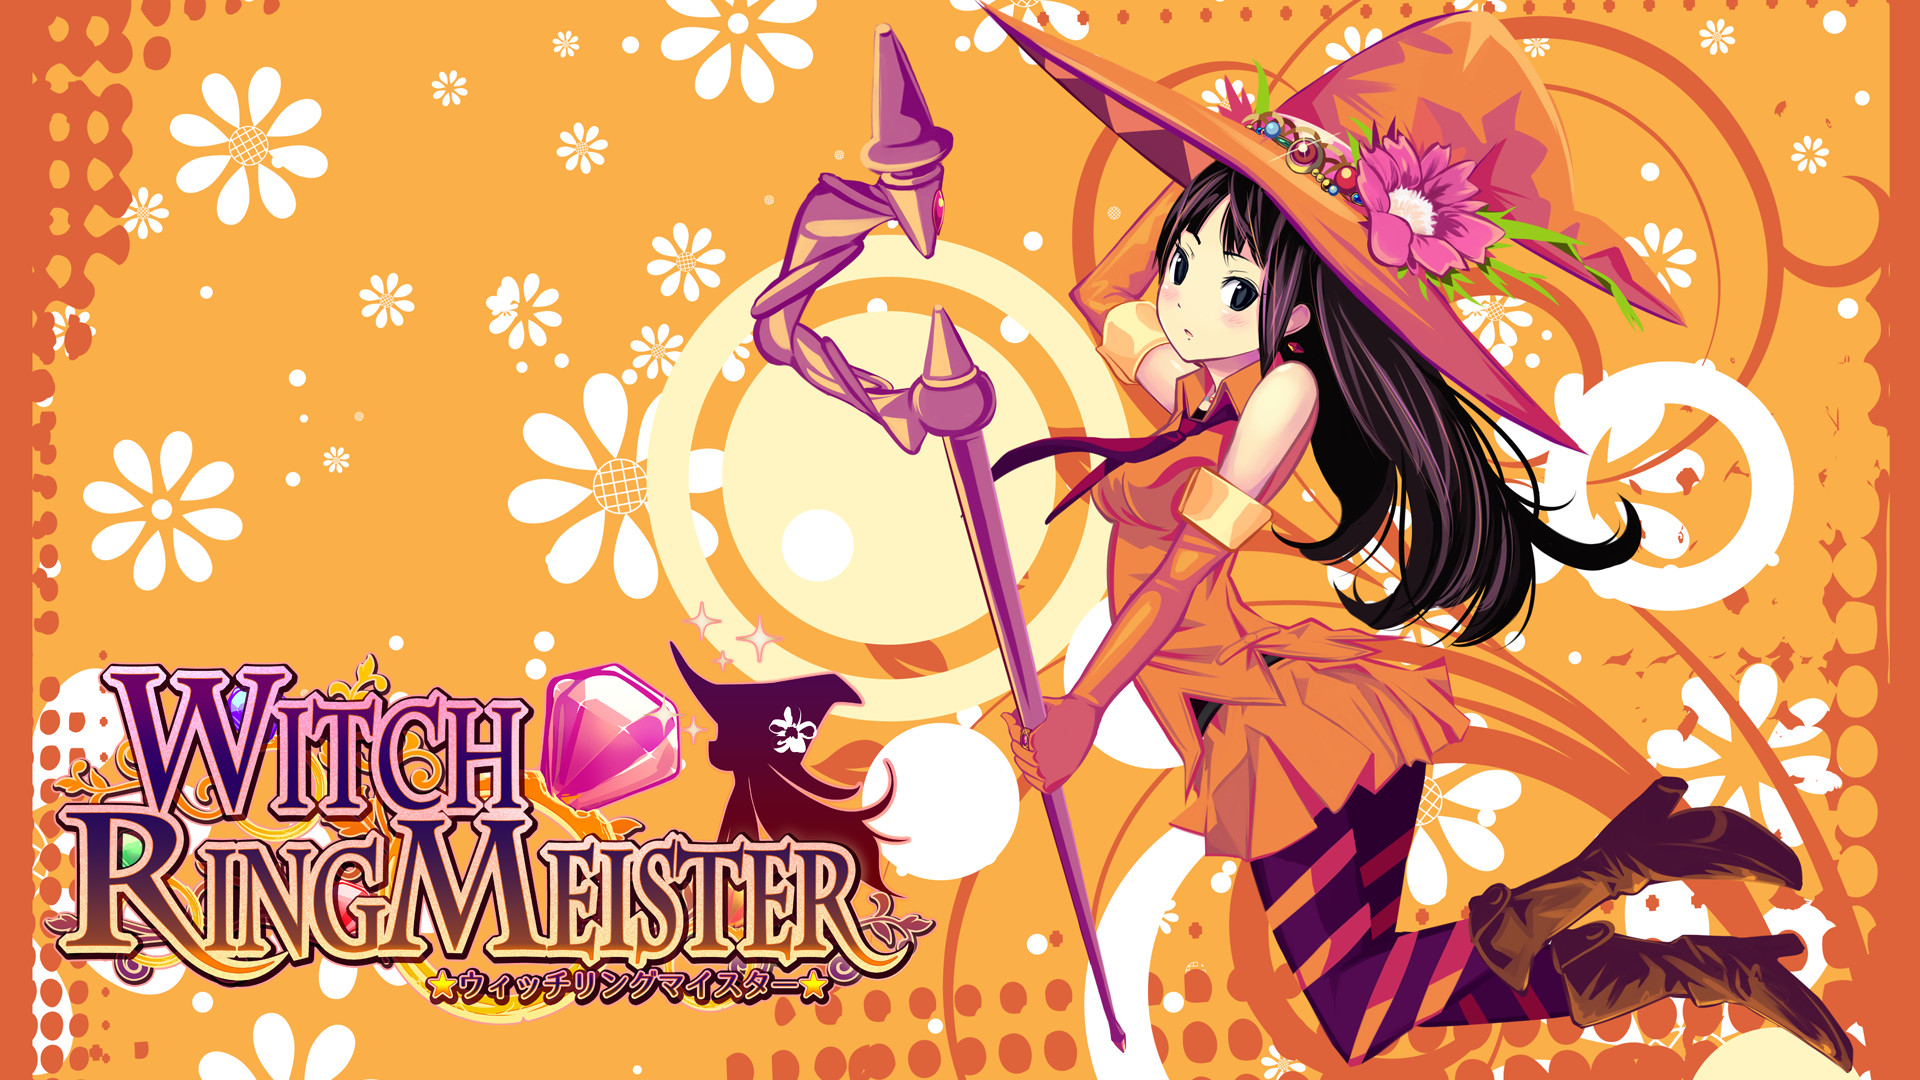 Witch Ring Meister Soundtrack Featured Screenshot #1